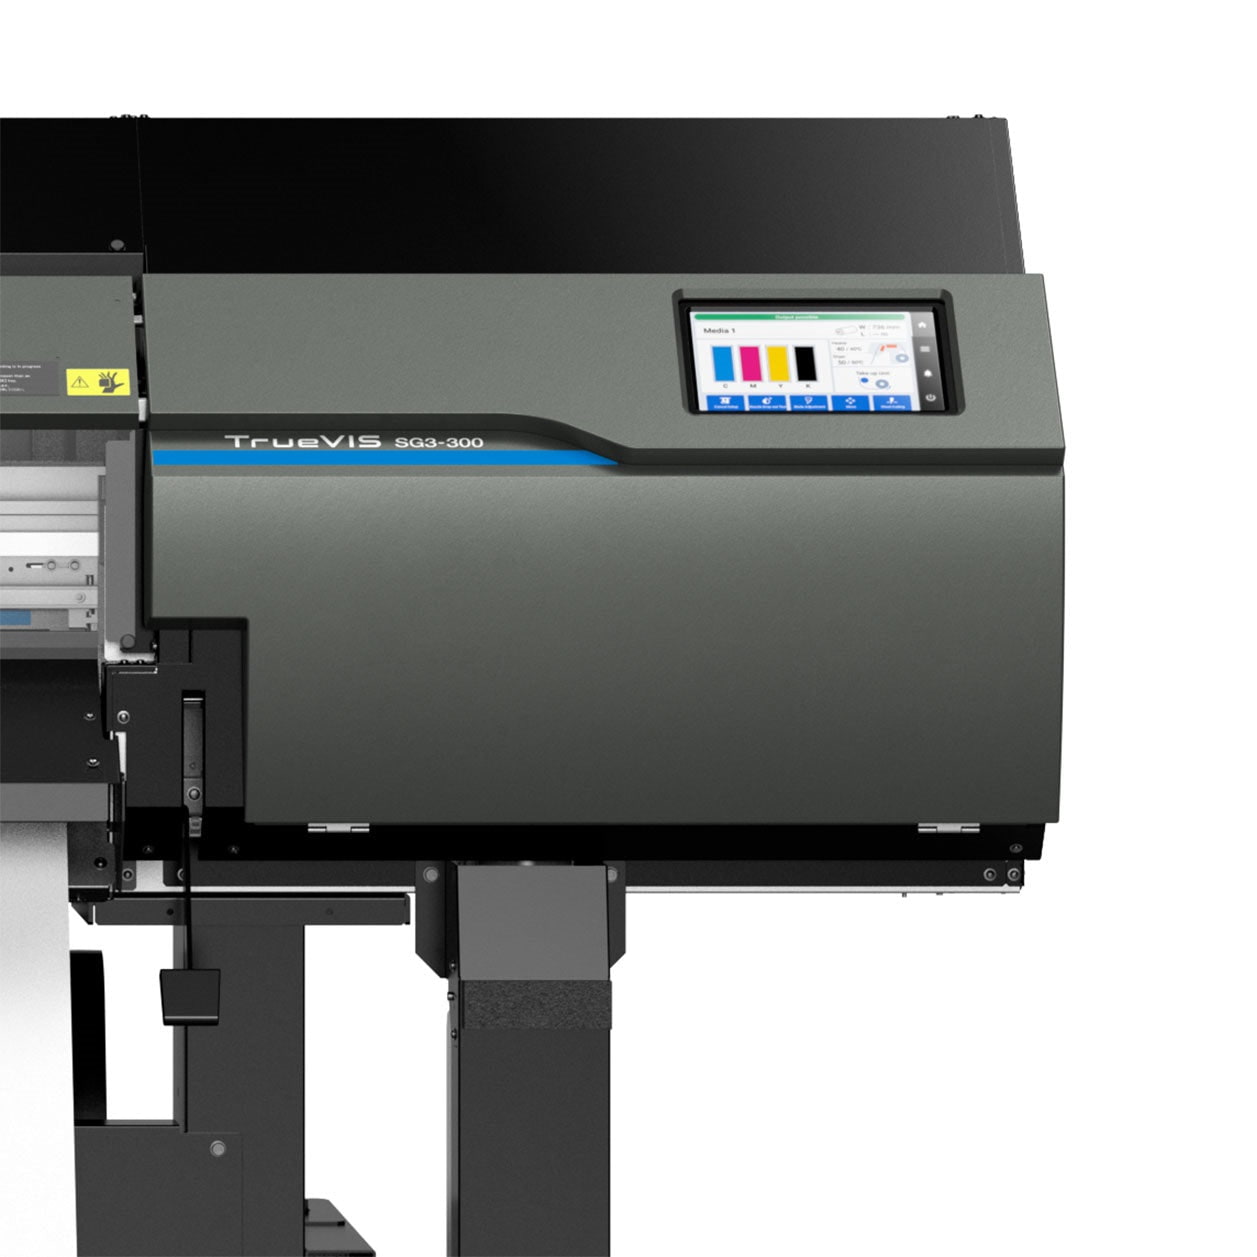 Absolute Toner $299/Month Extra Discounts Throughout April - Roland TrueVIS 30" SG3-300 High-Quality Large Format Inkjet Print/Cut, Eco-Solvent Printer/Cutter With 7" LCD Touchscreen Print and Cut Plotters